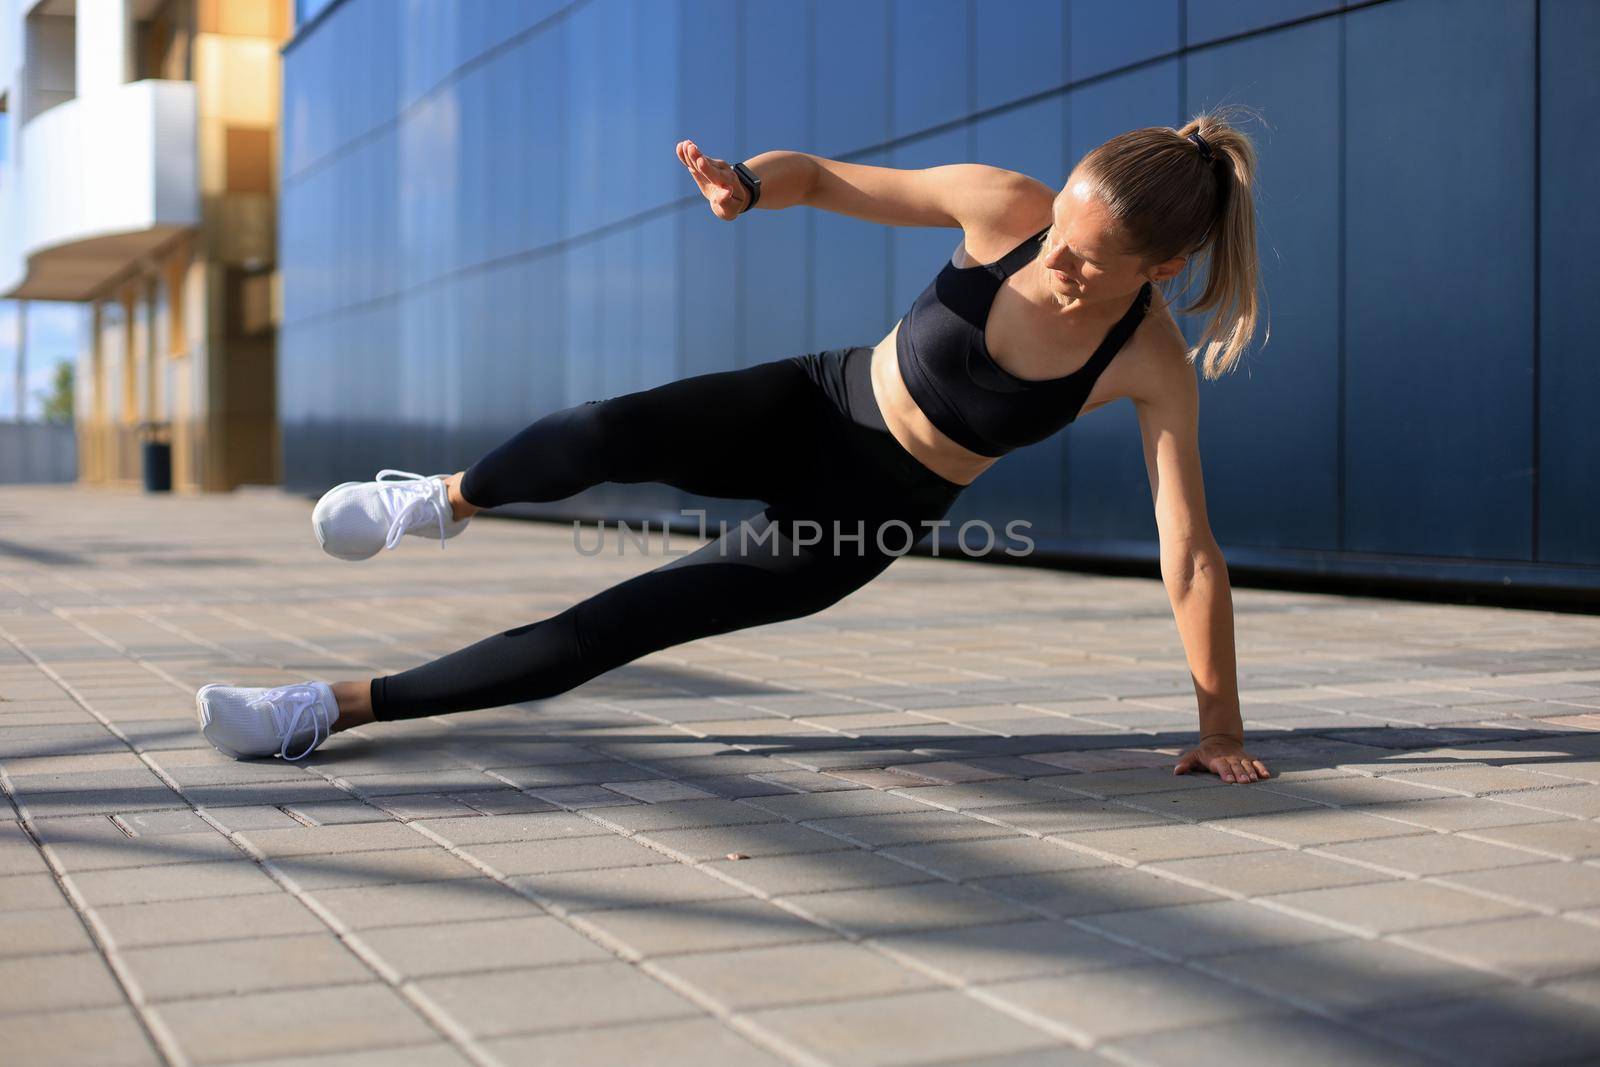 Fitness woman in sportswear doing side plank exercise outdoors